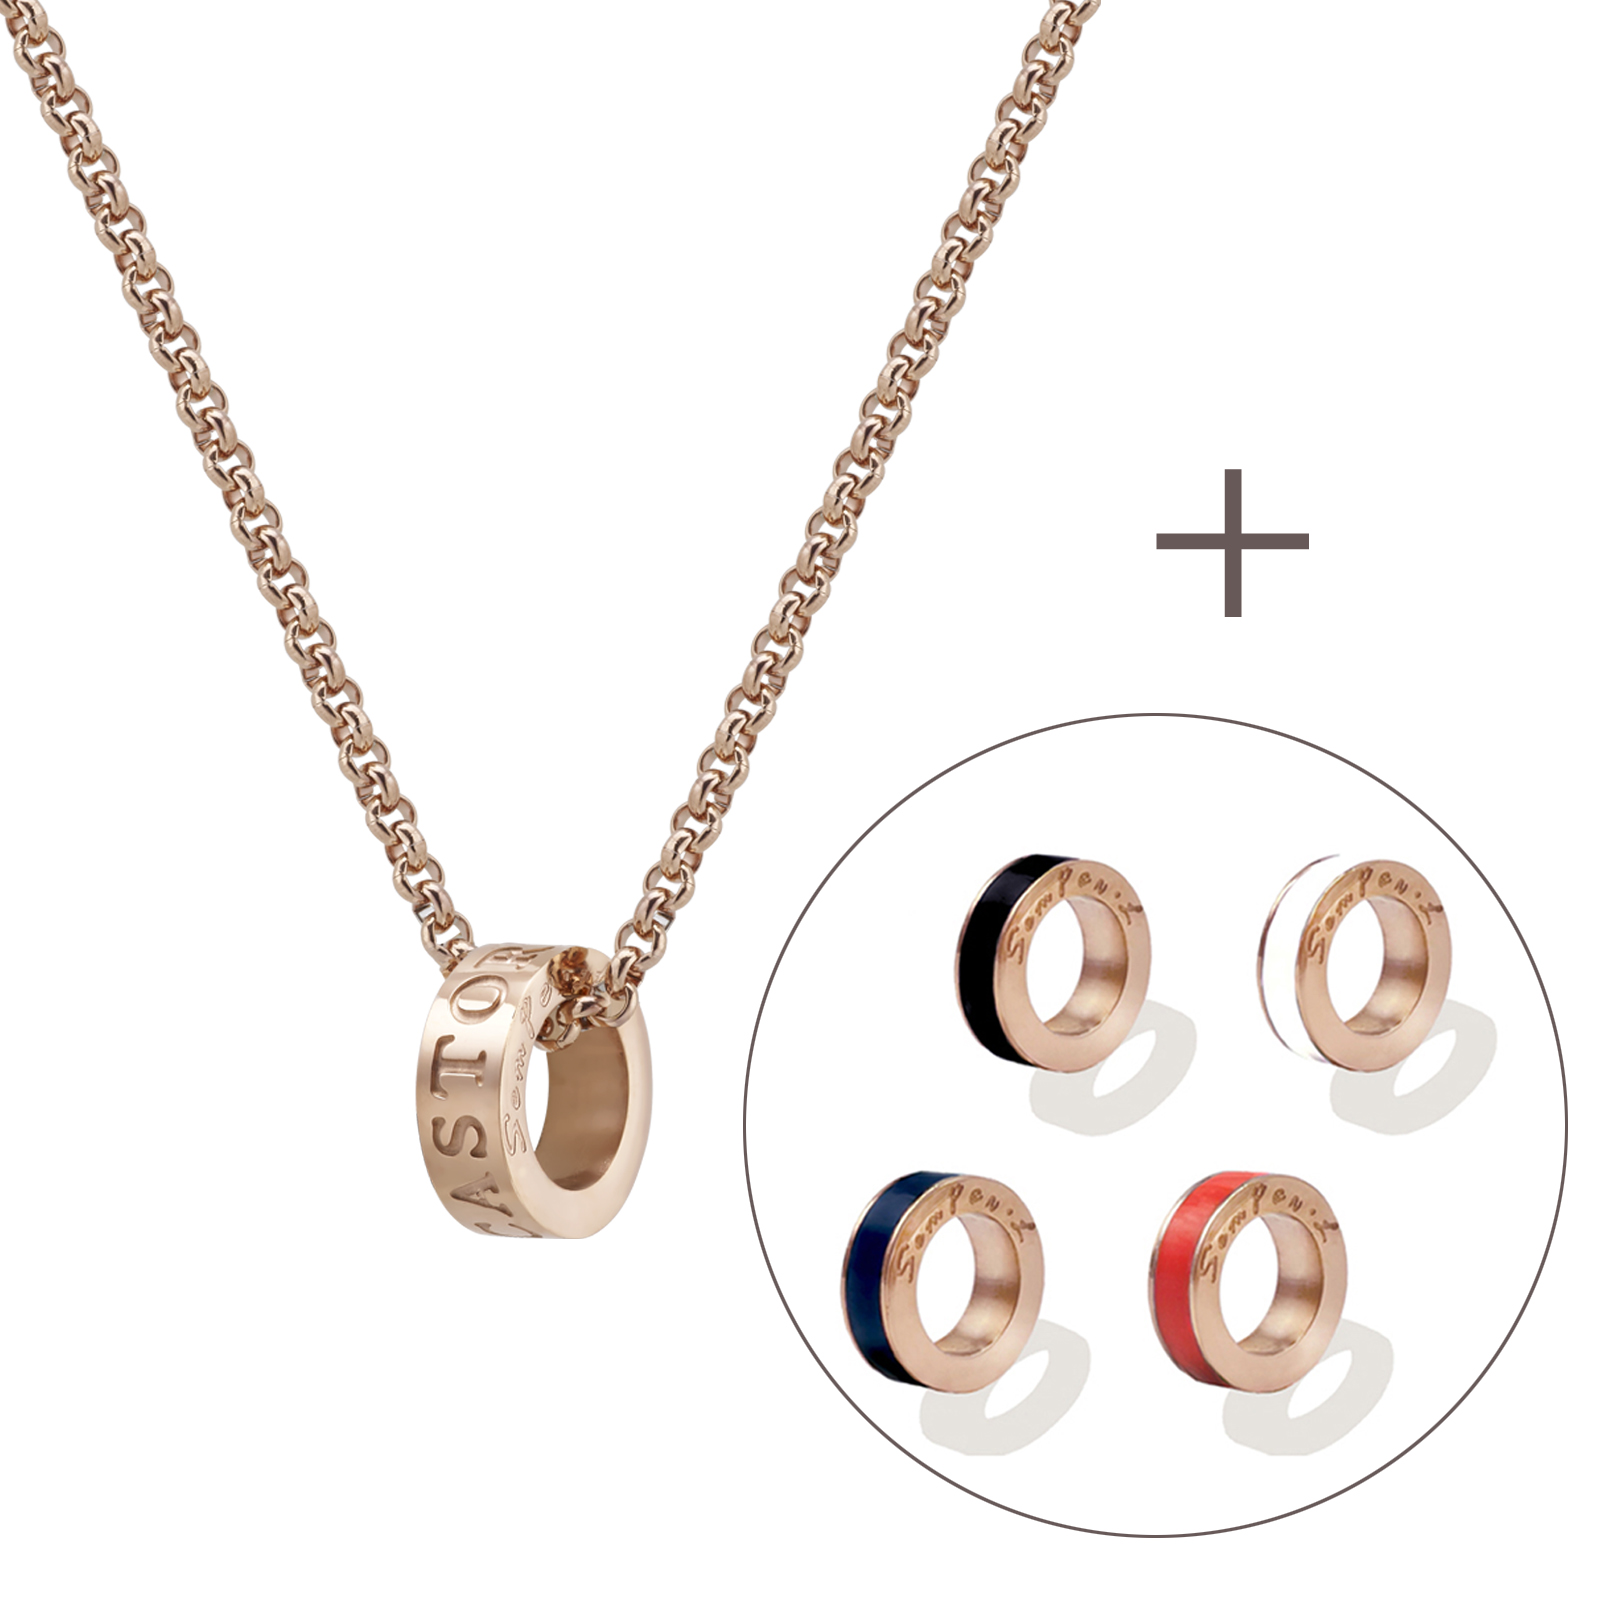 Timeless Necklace Set - S - RG [Necklace+Charm]  [LN0025-RG + LC0002]